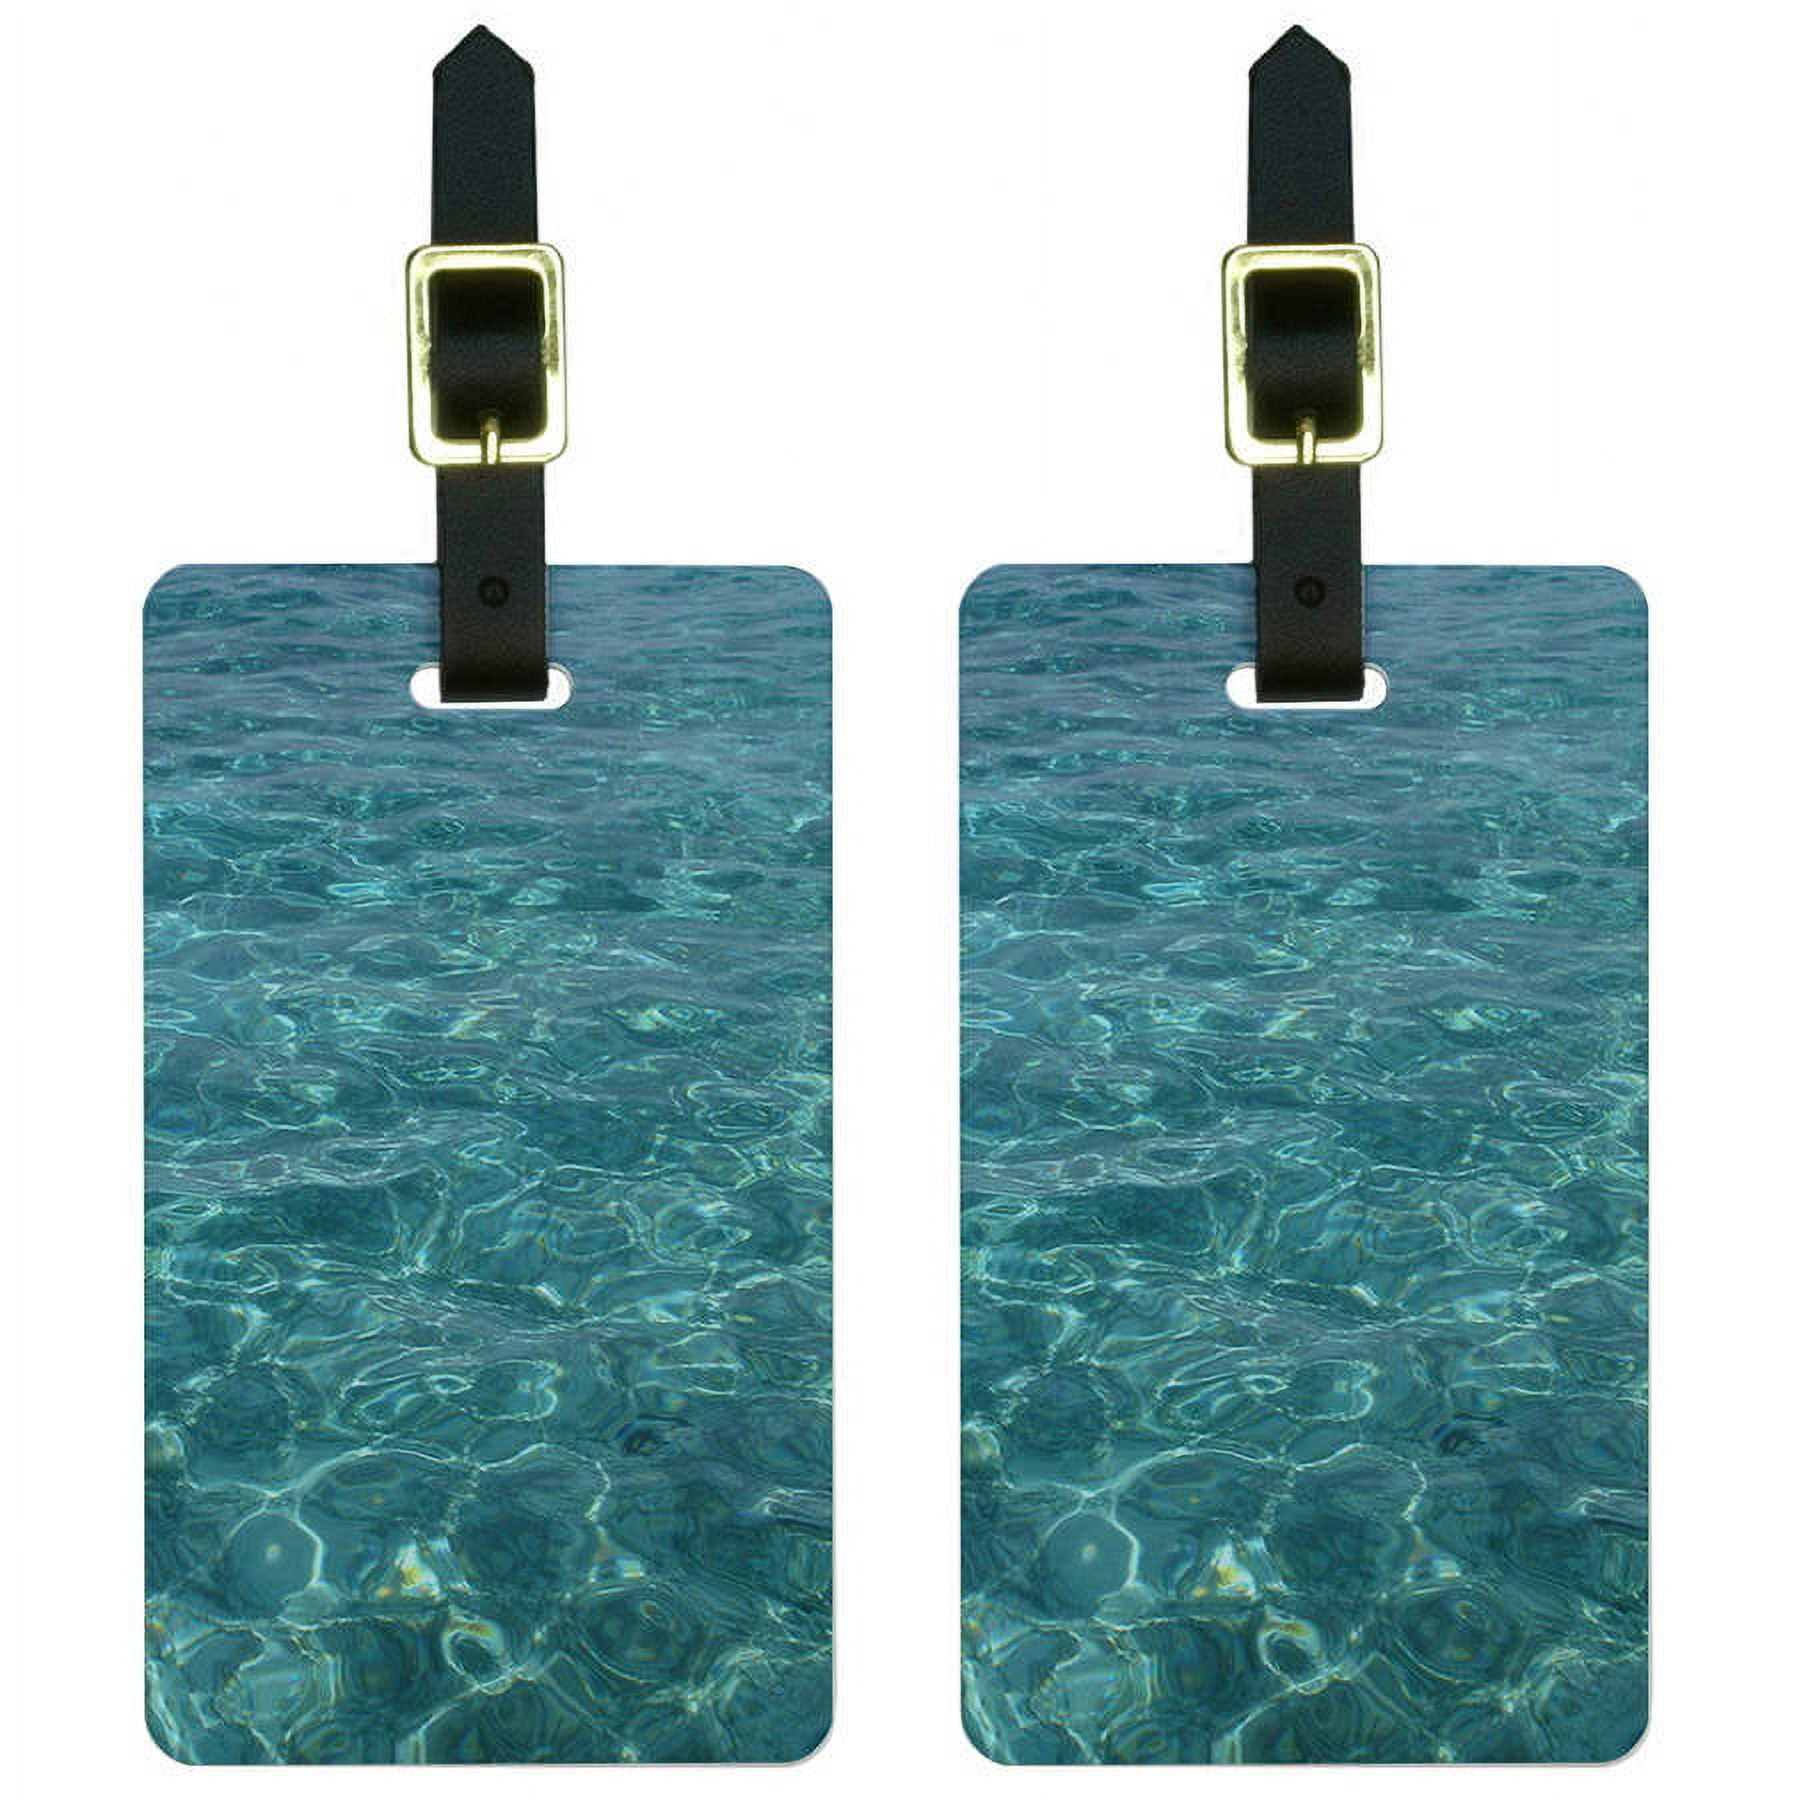  Salt Water Game Fish Fishing Compass Luggage ID Tags Carry-On  Cards - Set of 2 : Clothing, Shoes & Jewelry